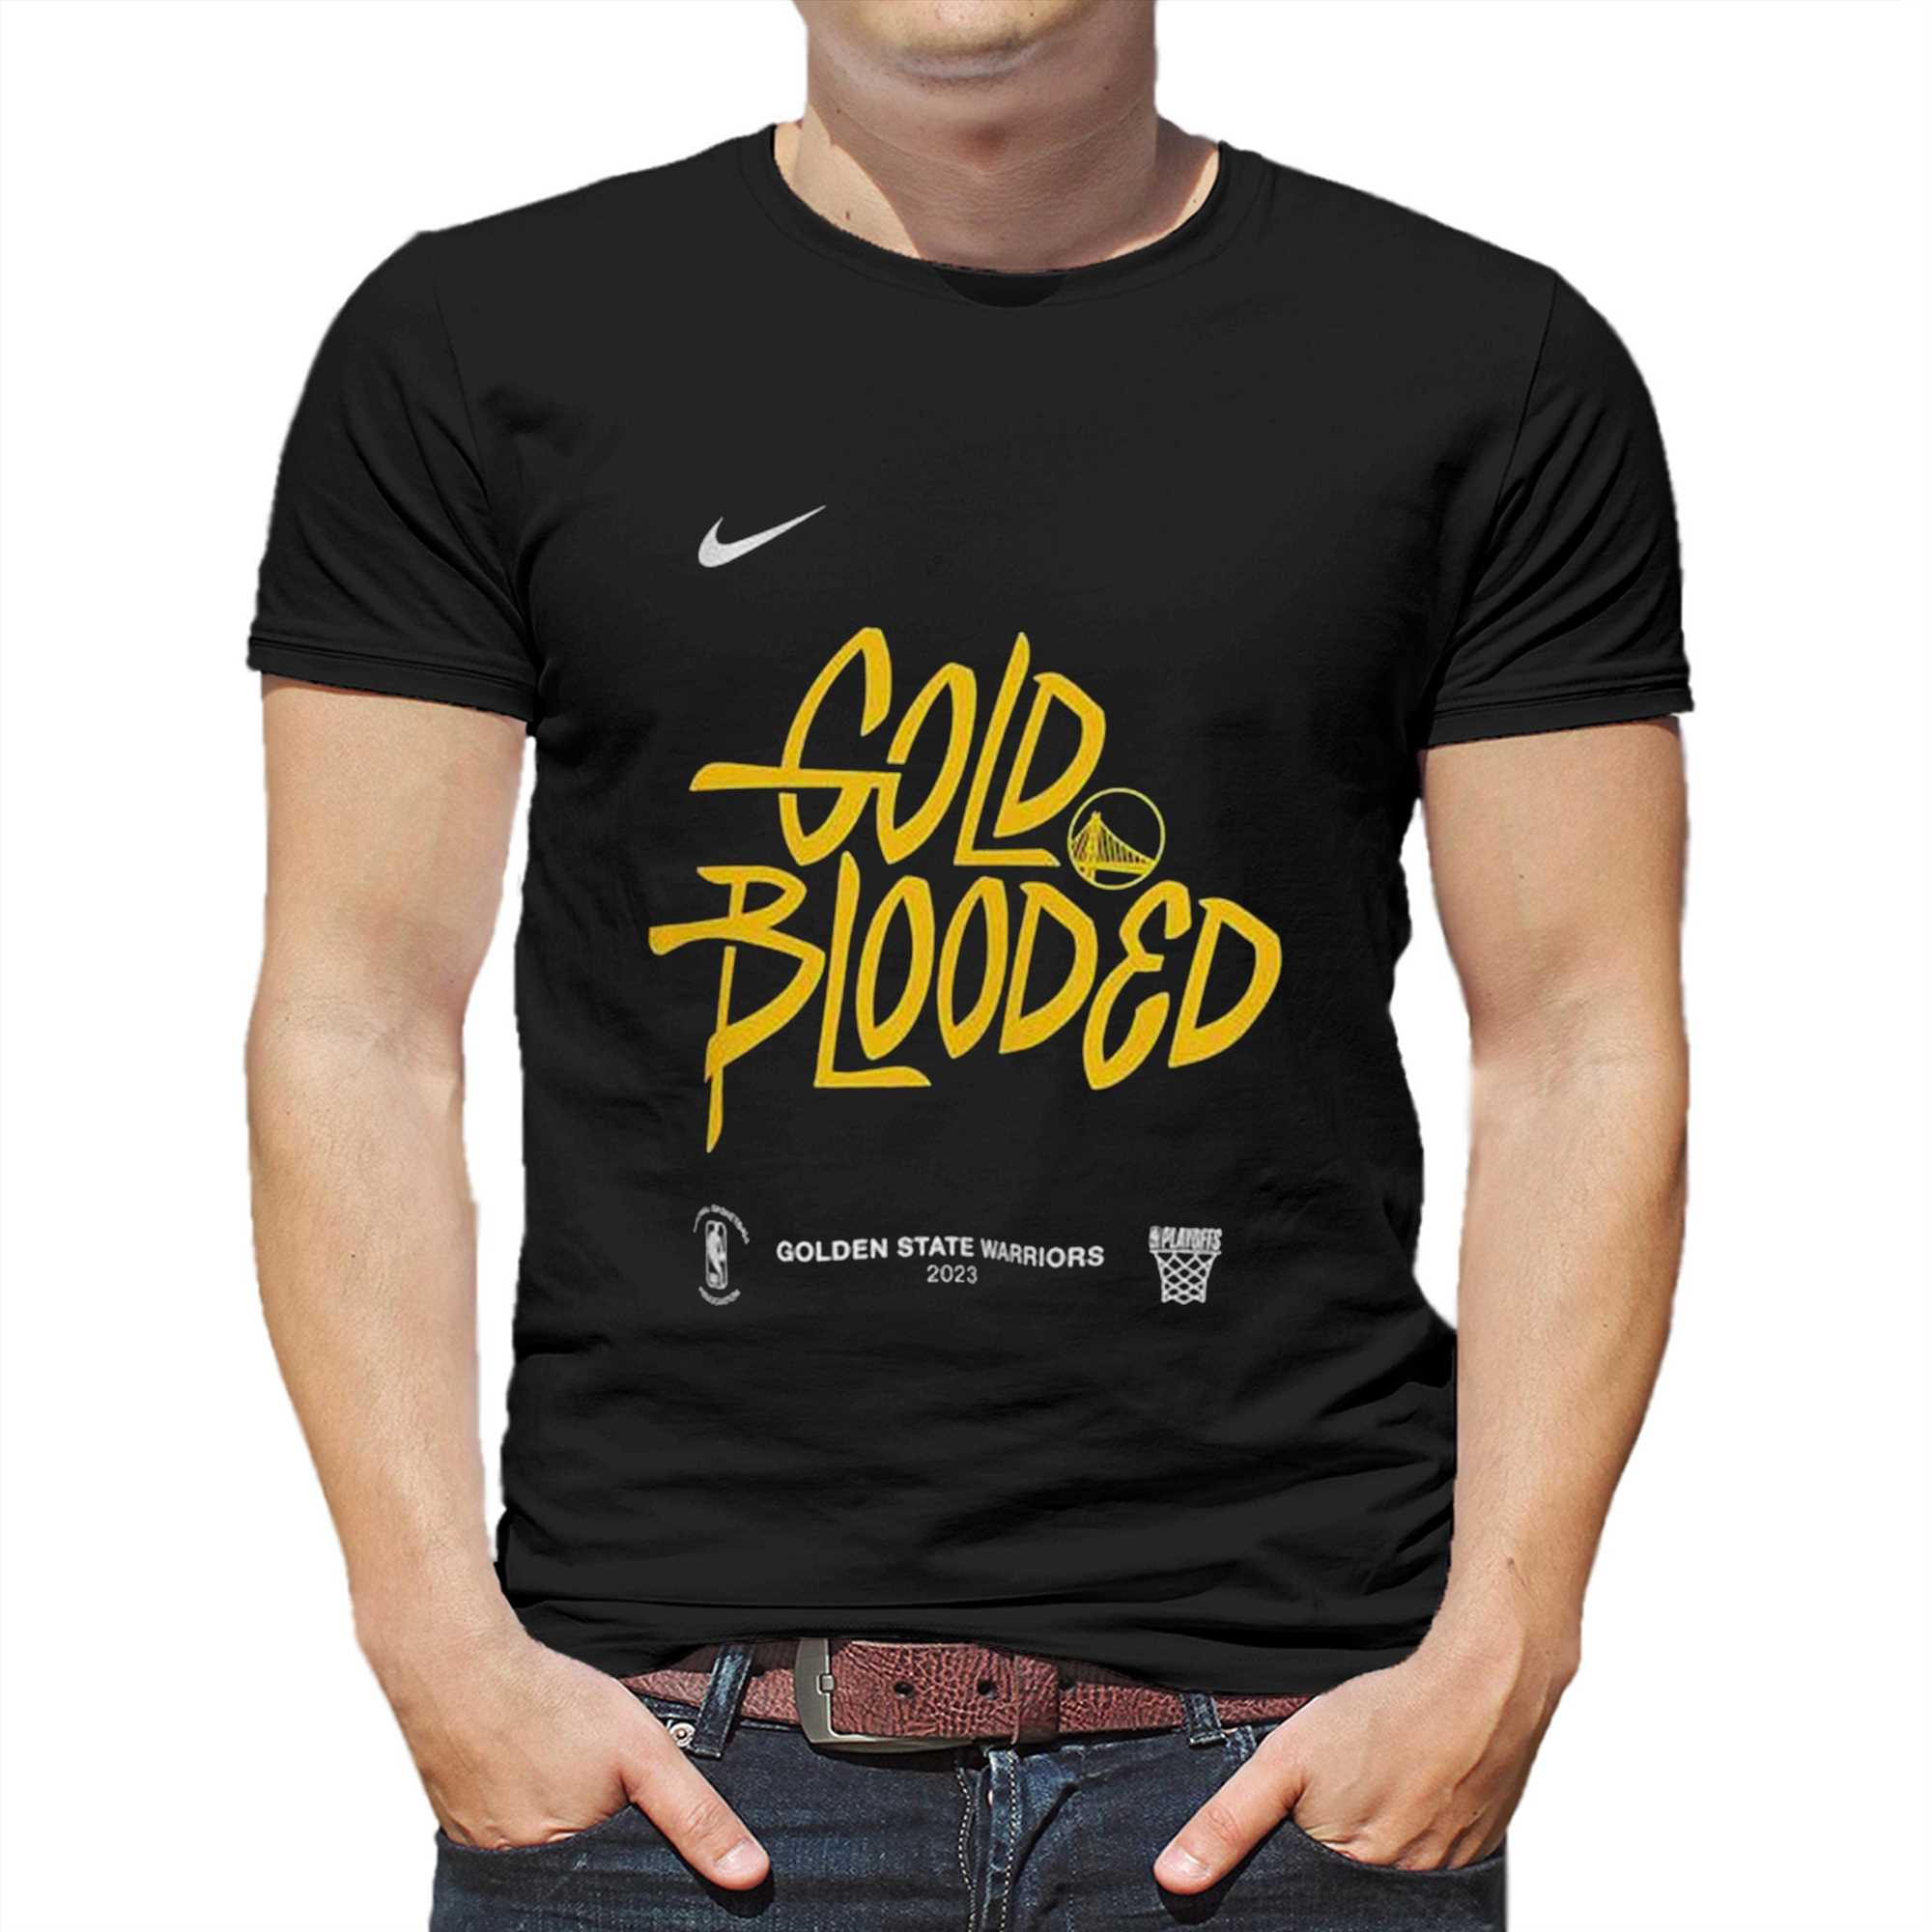 nike gold blooded t shirt